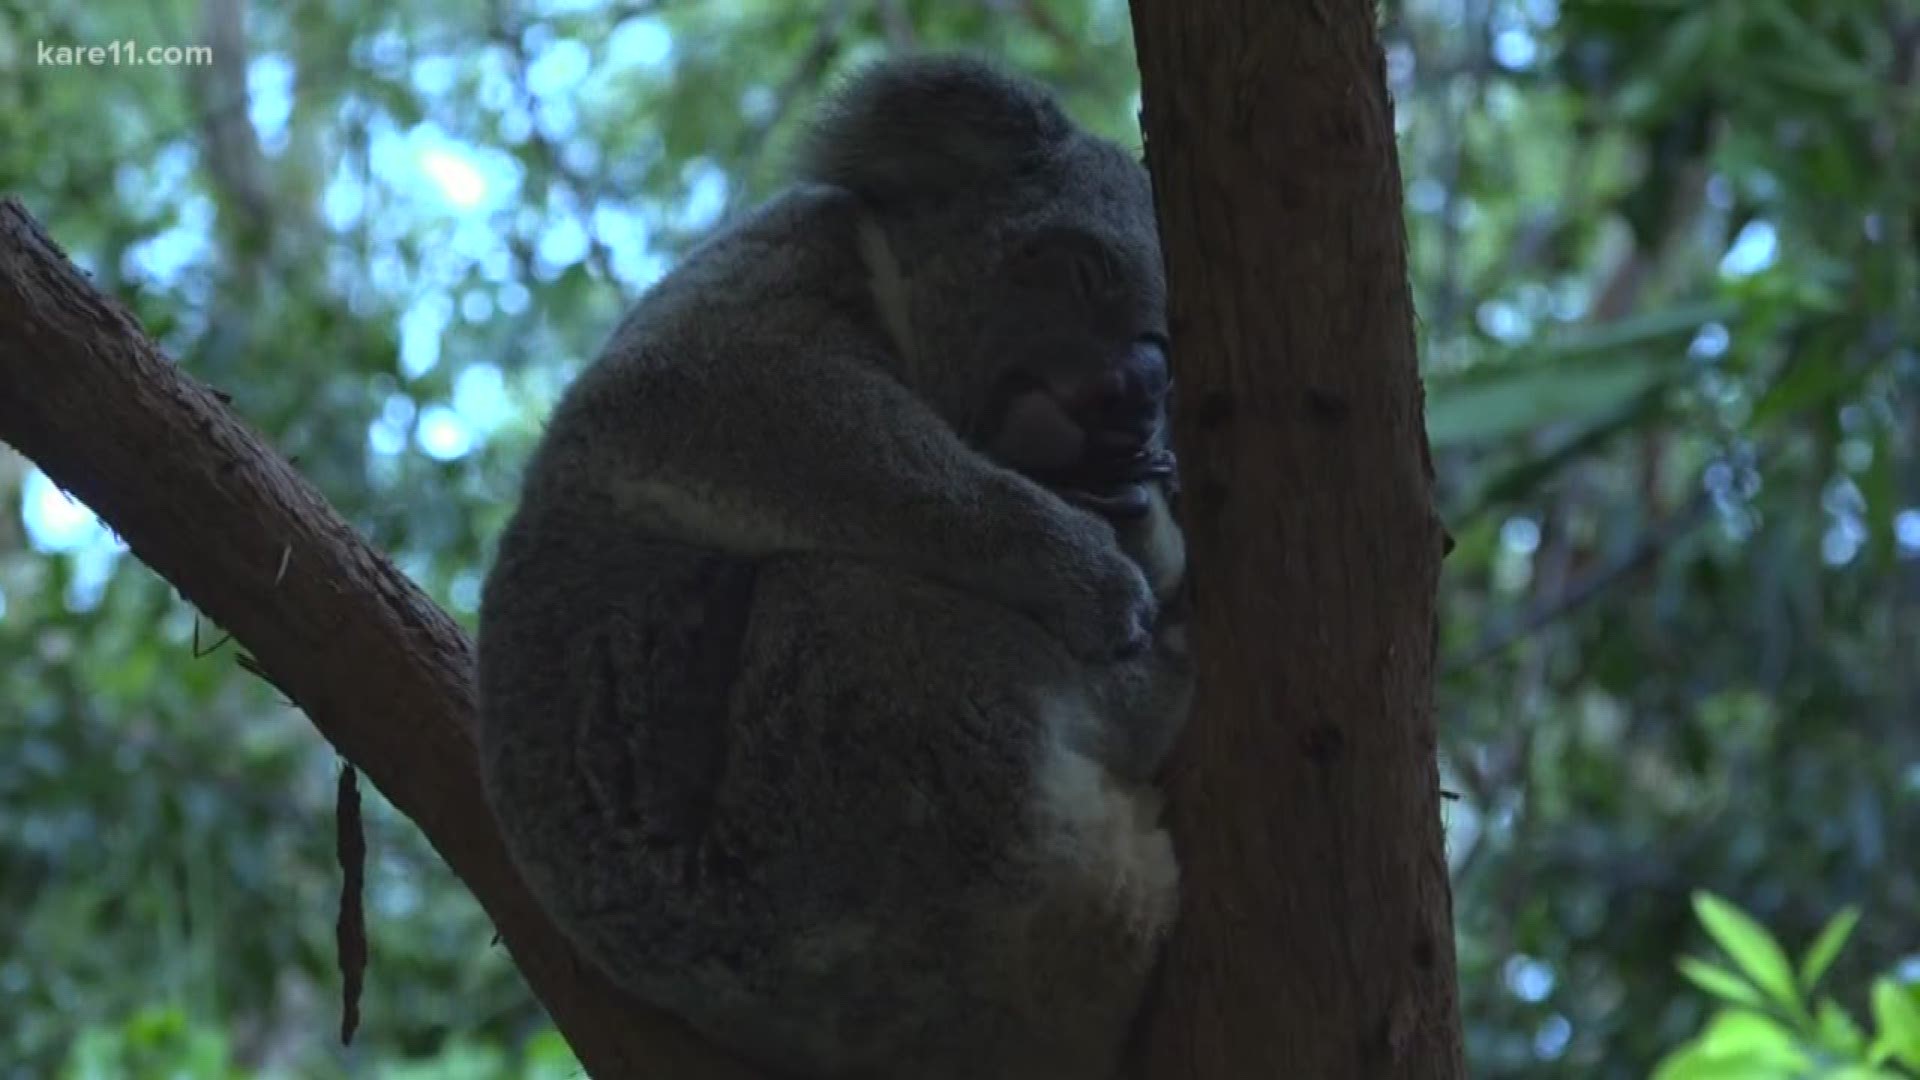 KARE 11's Sven Sundgaard is in Australia for his latest explorations. Here's a look at some of the animals he's seeing!